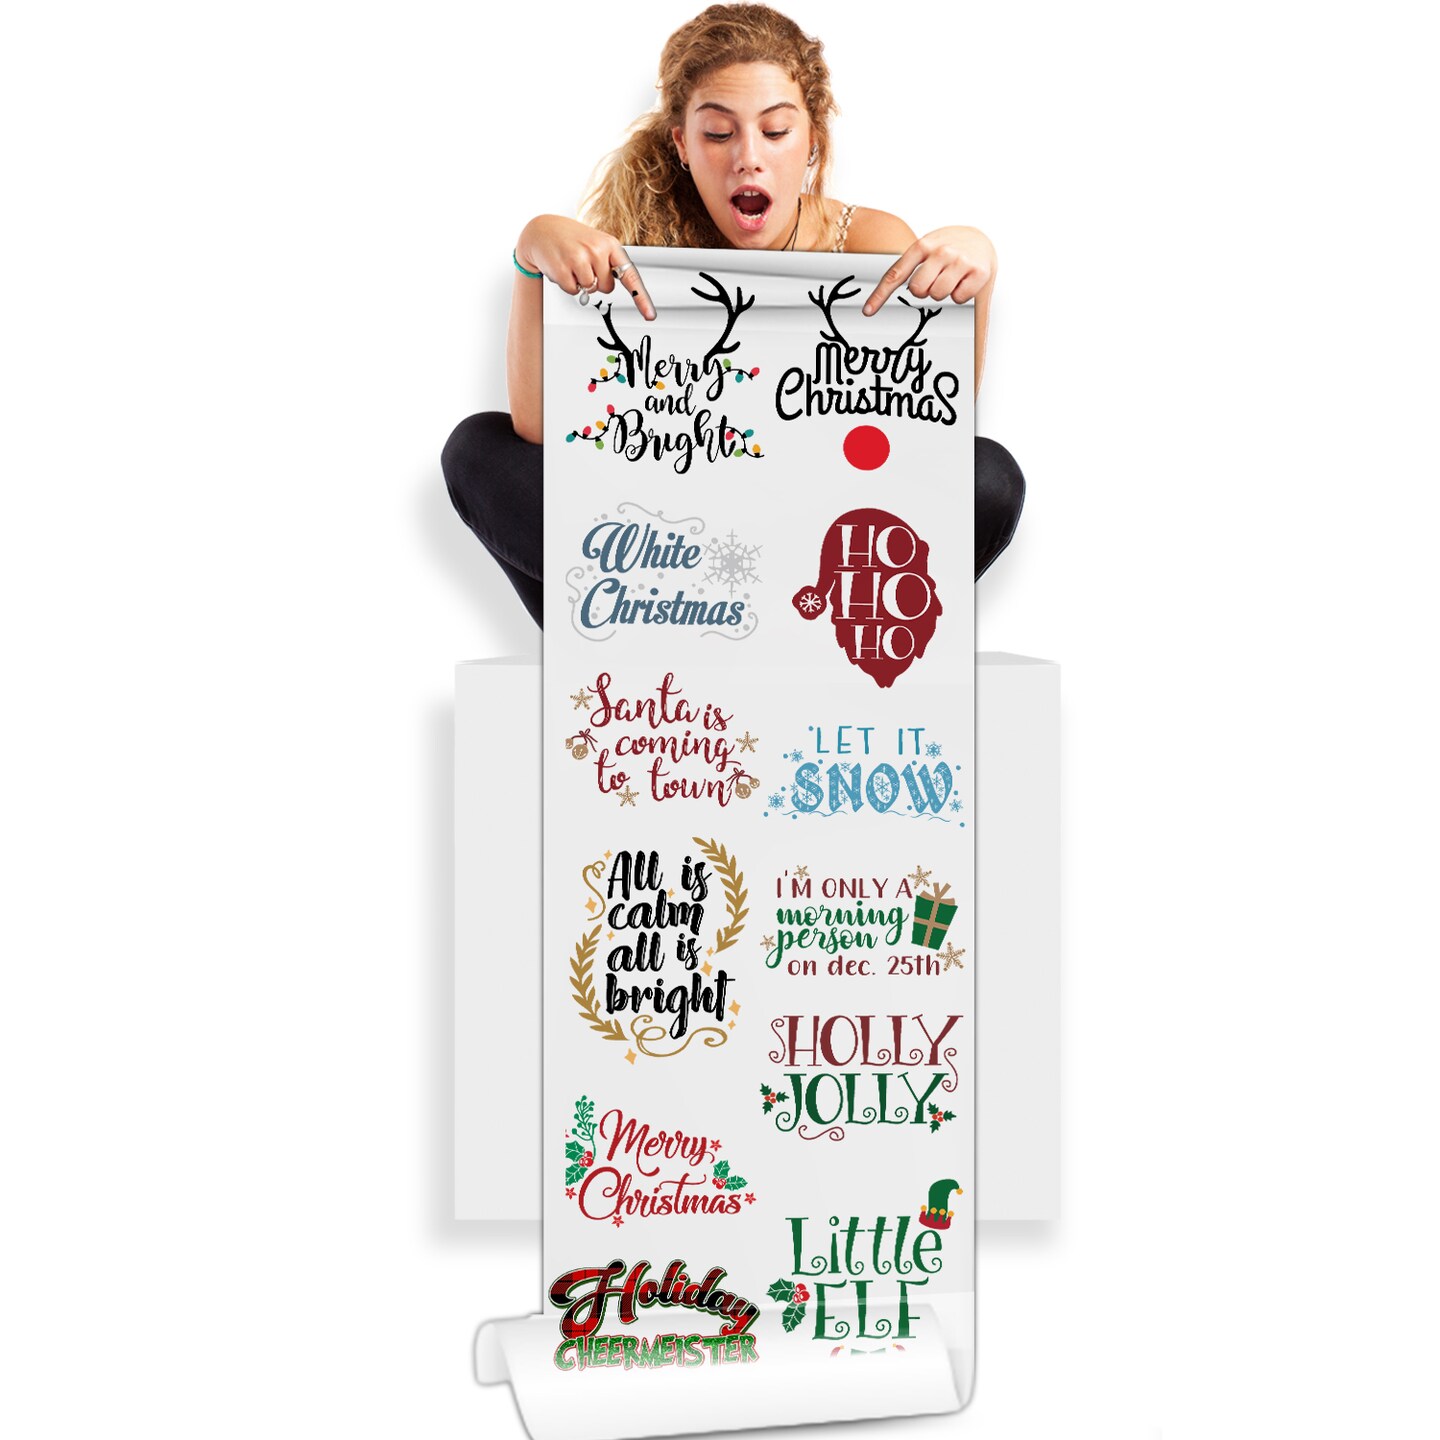 Merry and Bright Christmas Prints DTF (Direct-to-Film) Gang Sheets - 22x60 dtf transfers, ready to press, direct to film, dtf transfers, dtf prints, custom heat transfers, Heat Transfers Sheets, digital prints, Bulk DTF Transfers, gang sheet